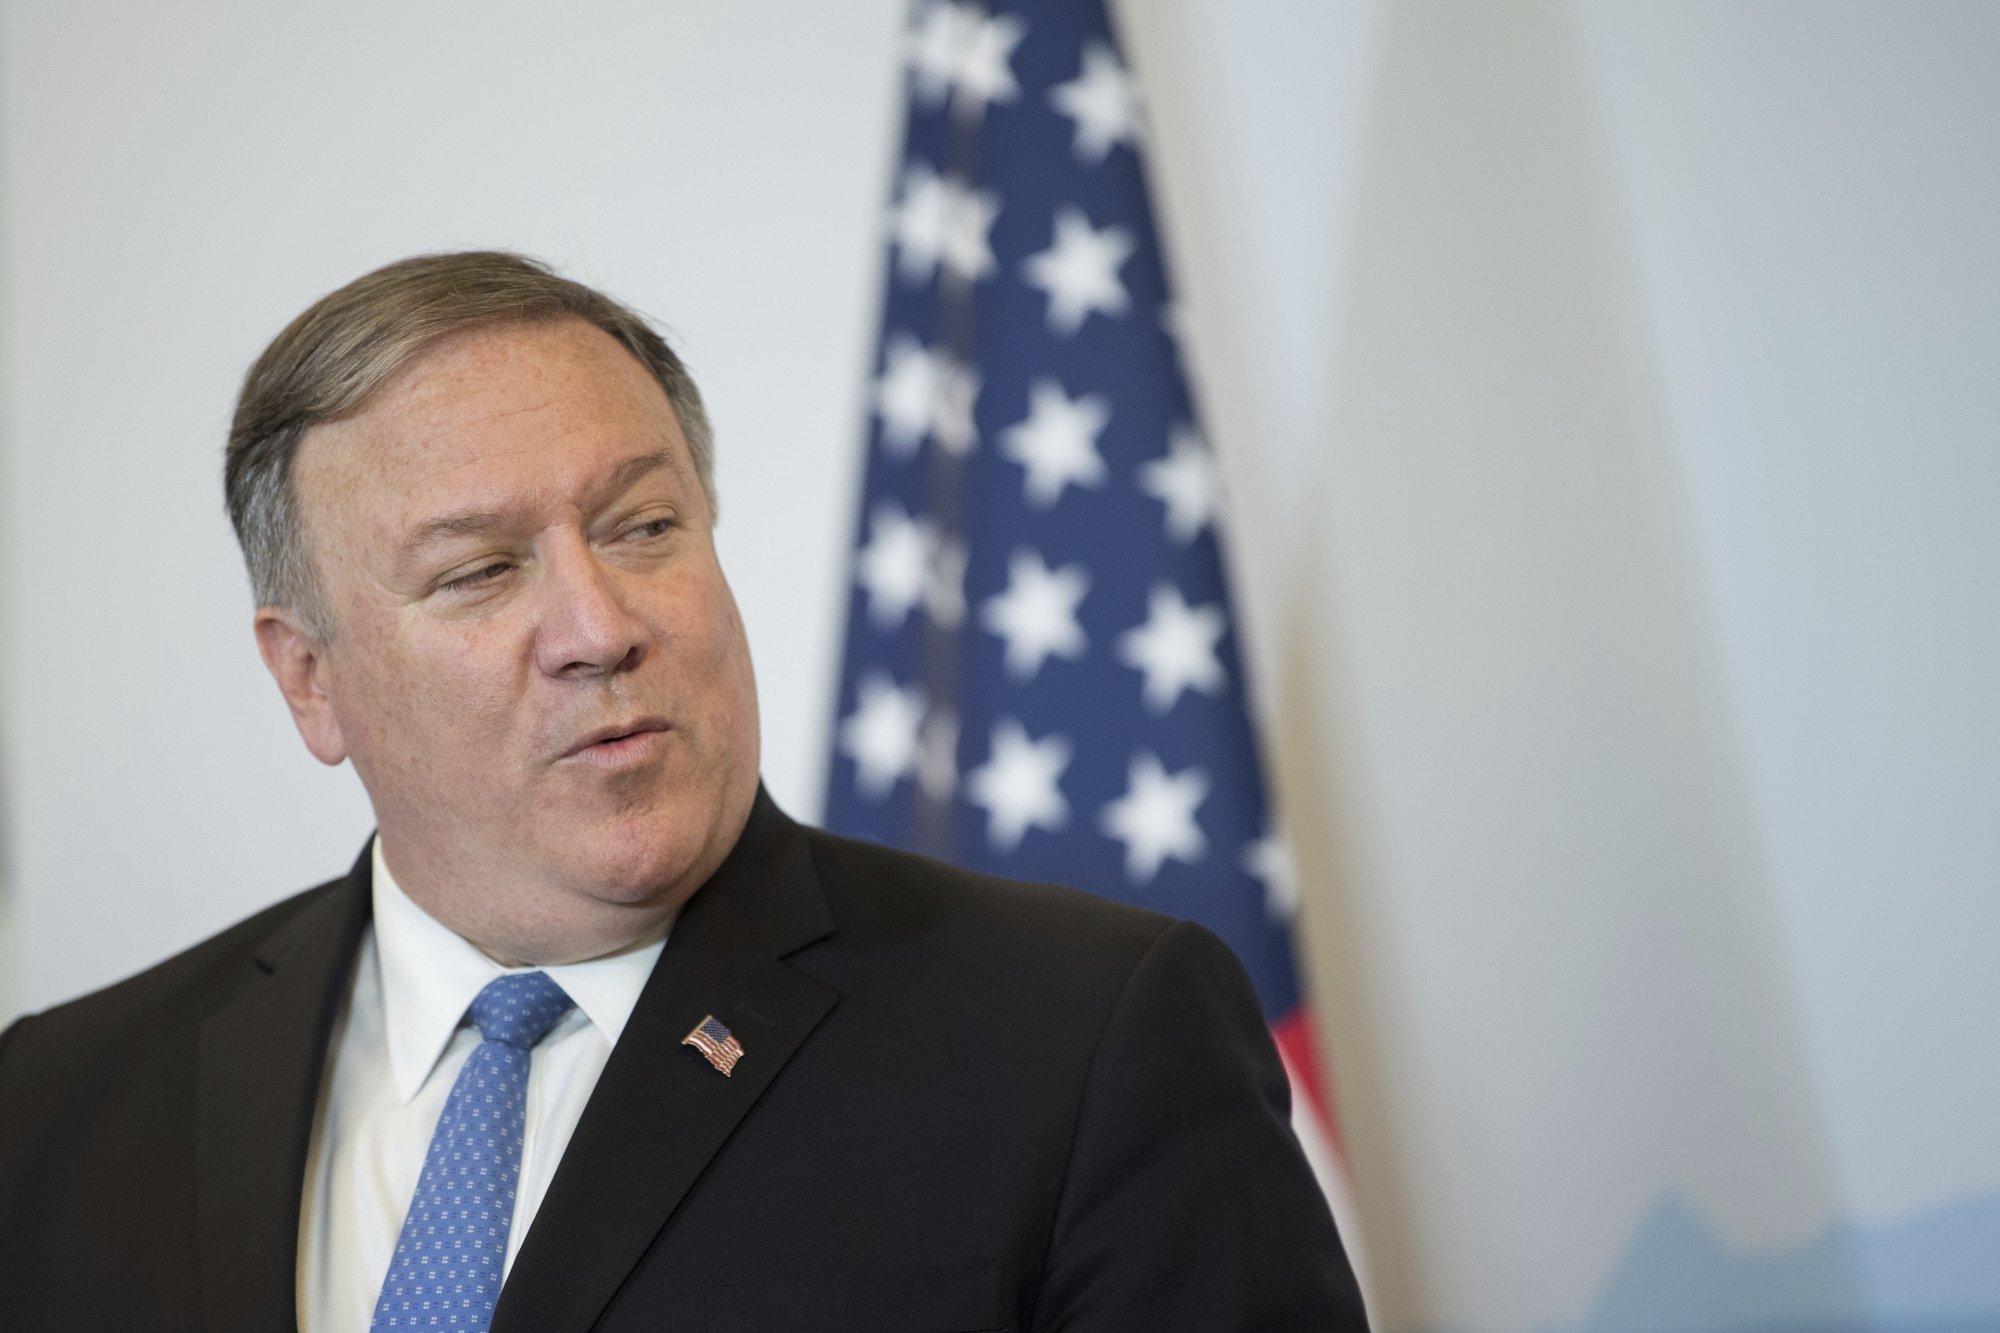 Pompeo to push in India for more U.S. access to local markets